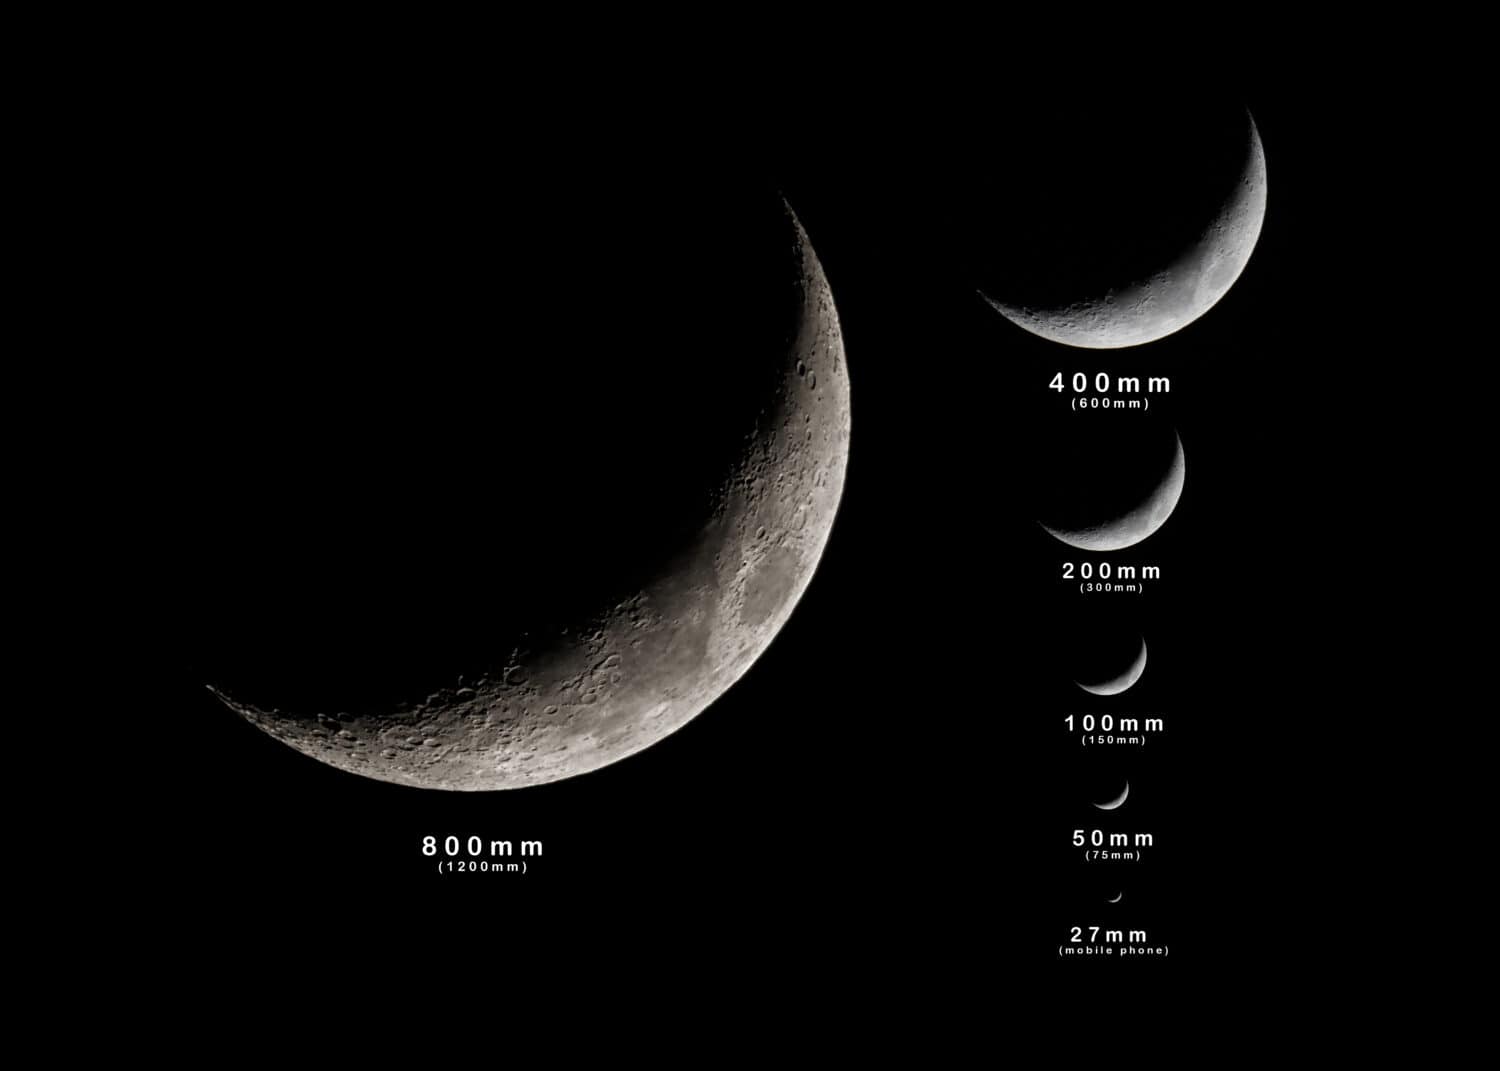 Reference of different Camera Lens Focal Lengths with the Moon as example